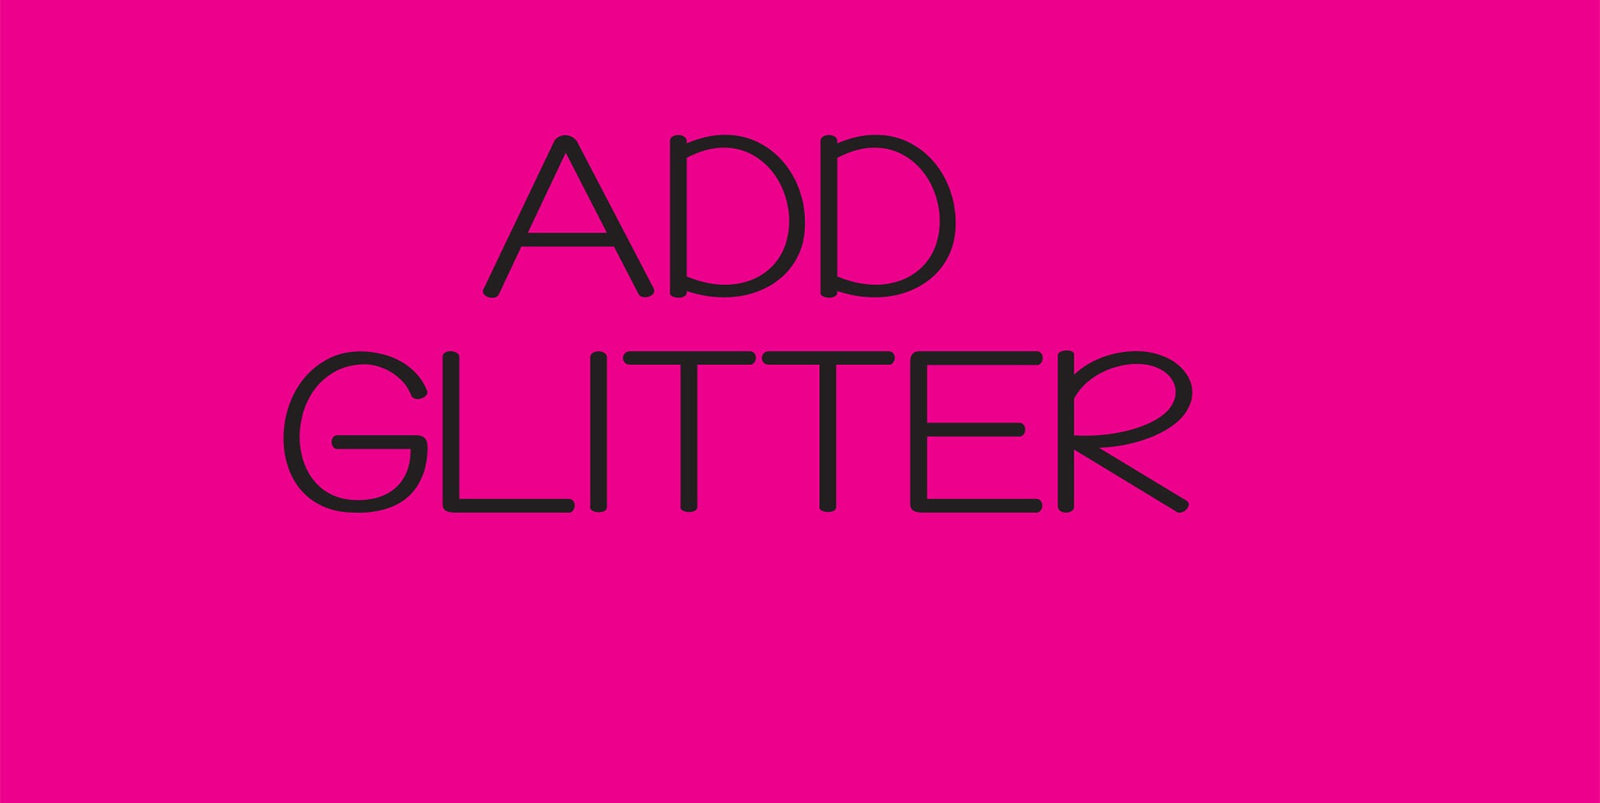 Add Glitter To Your Shirt